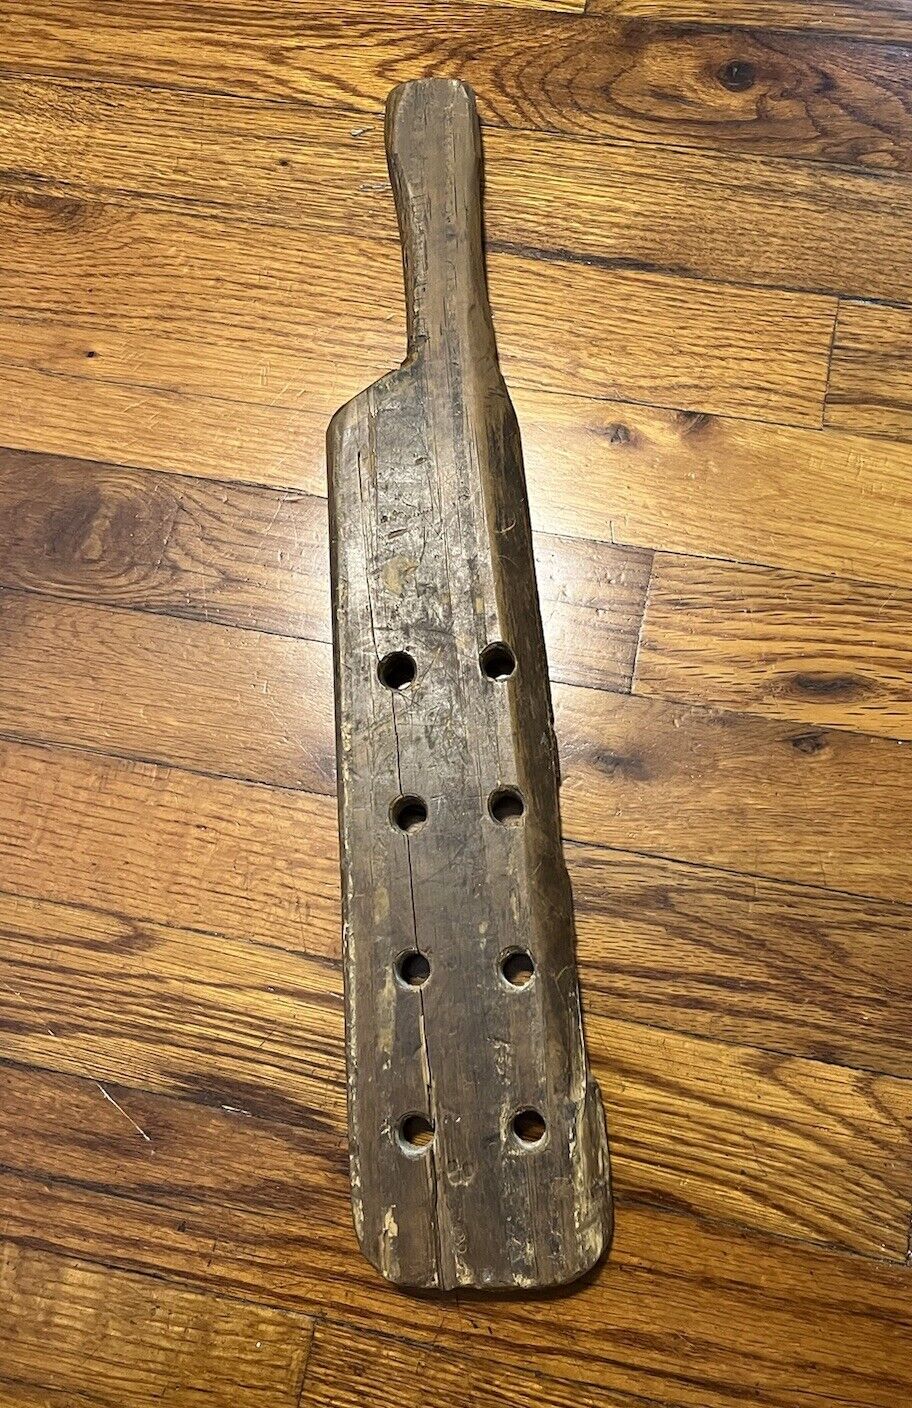 Vtg Old School Lesson Learning Wooden Paddle With Holes Drilled Attitude Adjust